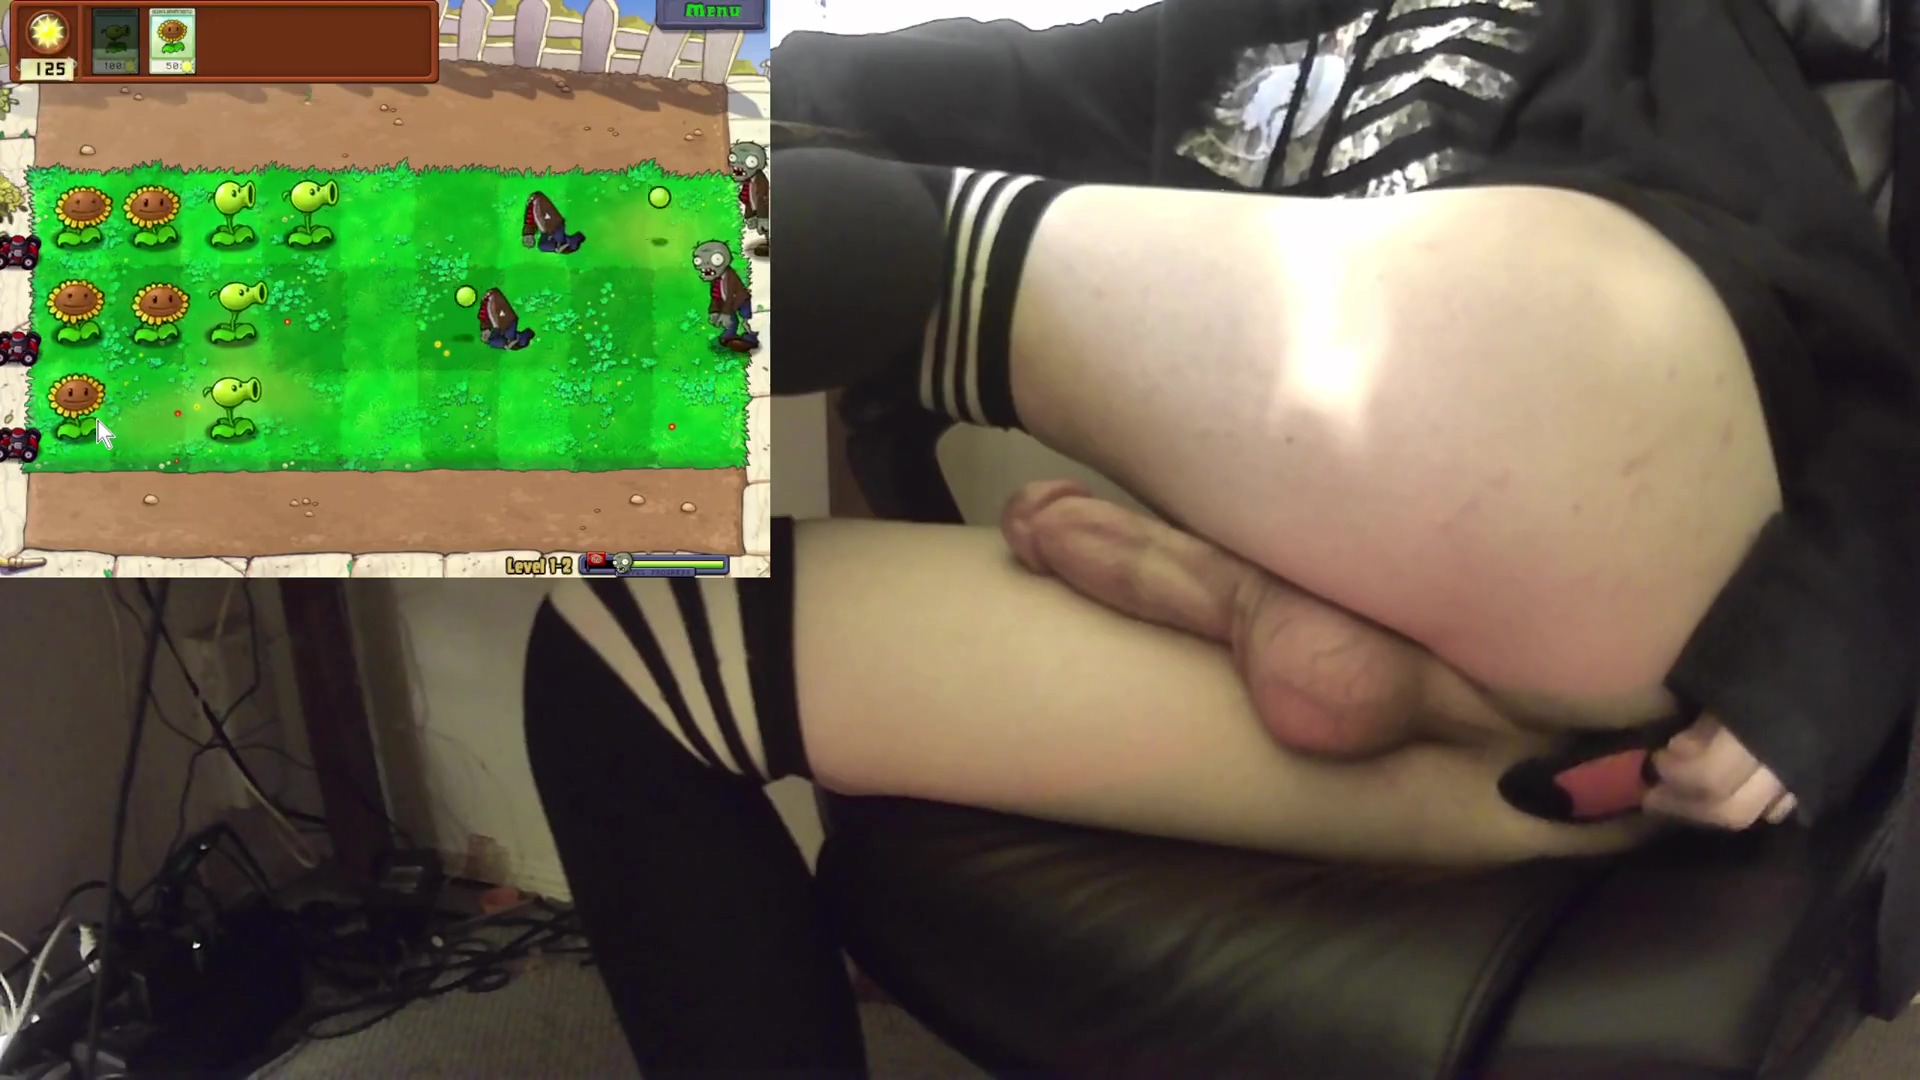 Femboy Gaming Plants Vs Zombies #1 + Thrusting Buttplug Shemale Porn Video - Shemale and Tranny Porn Tube image